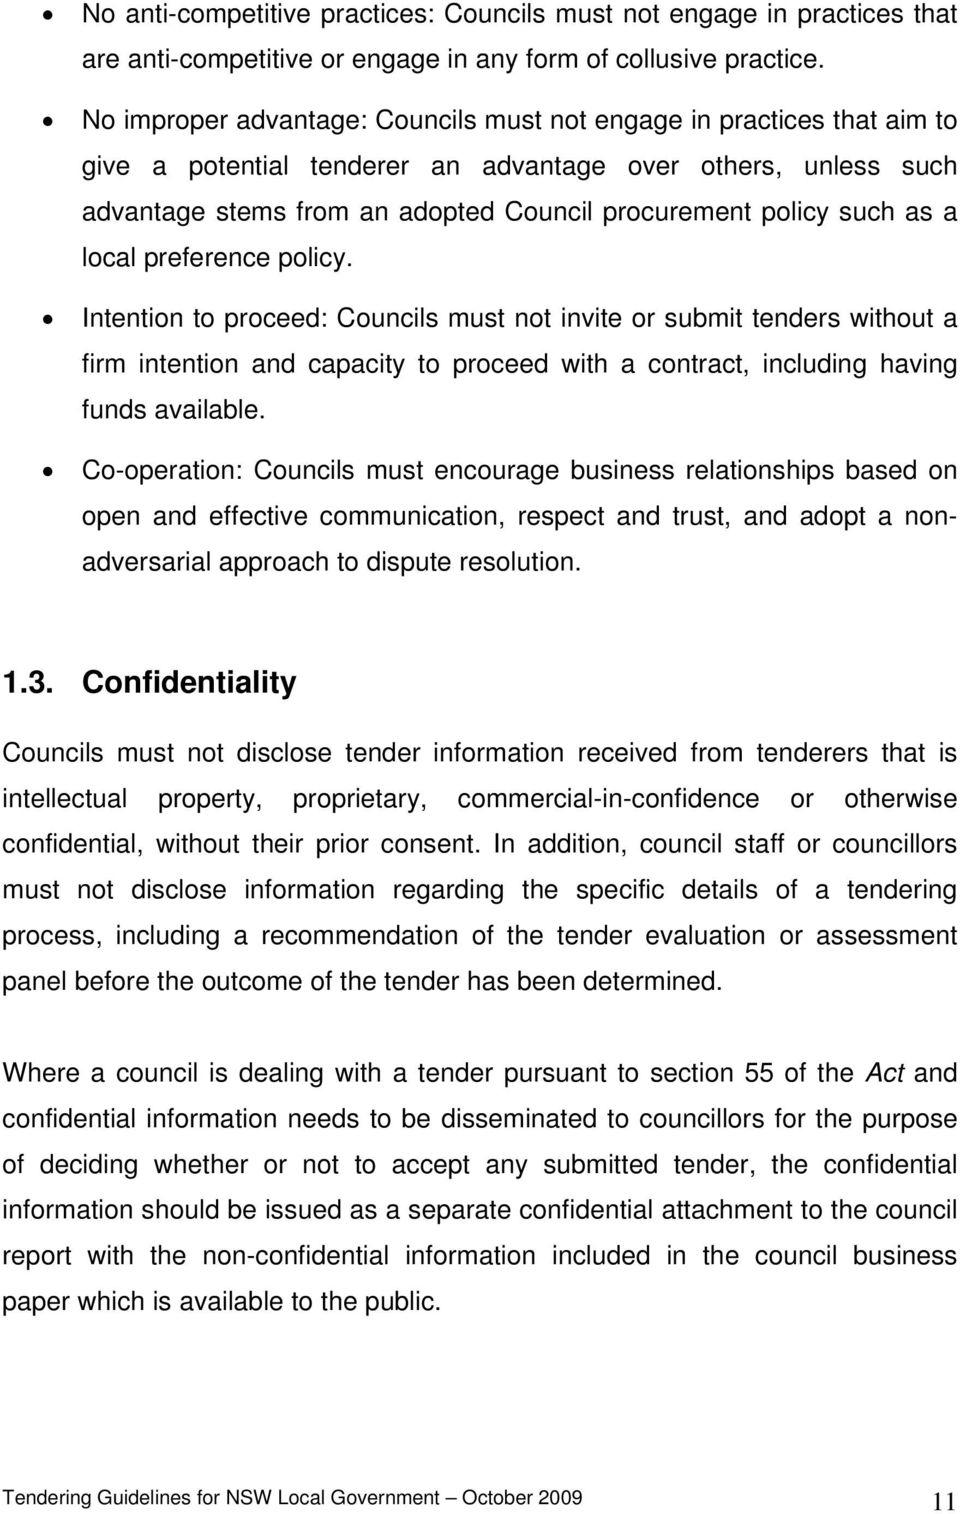 such as a local preference policy. Intention to proceed: Councils must not invite or submit tenders without a firm intention and capacity to proceed with a contract, including having funds available.